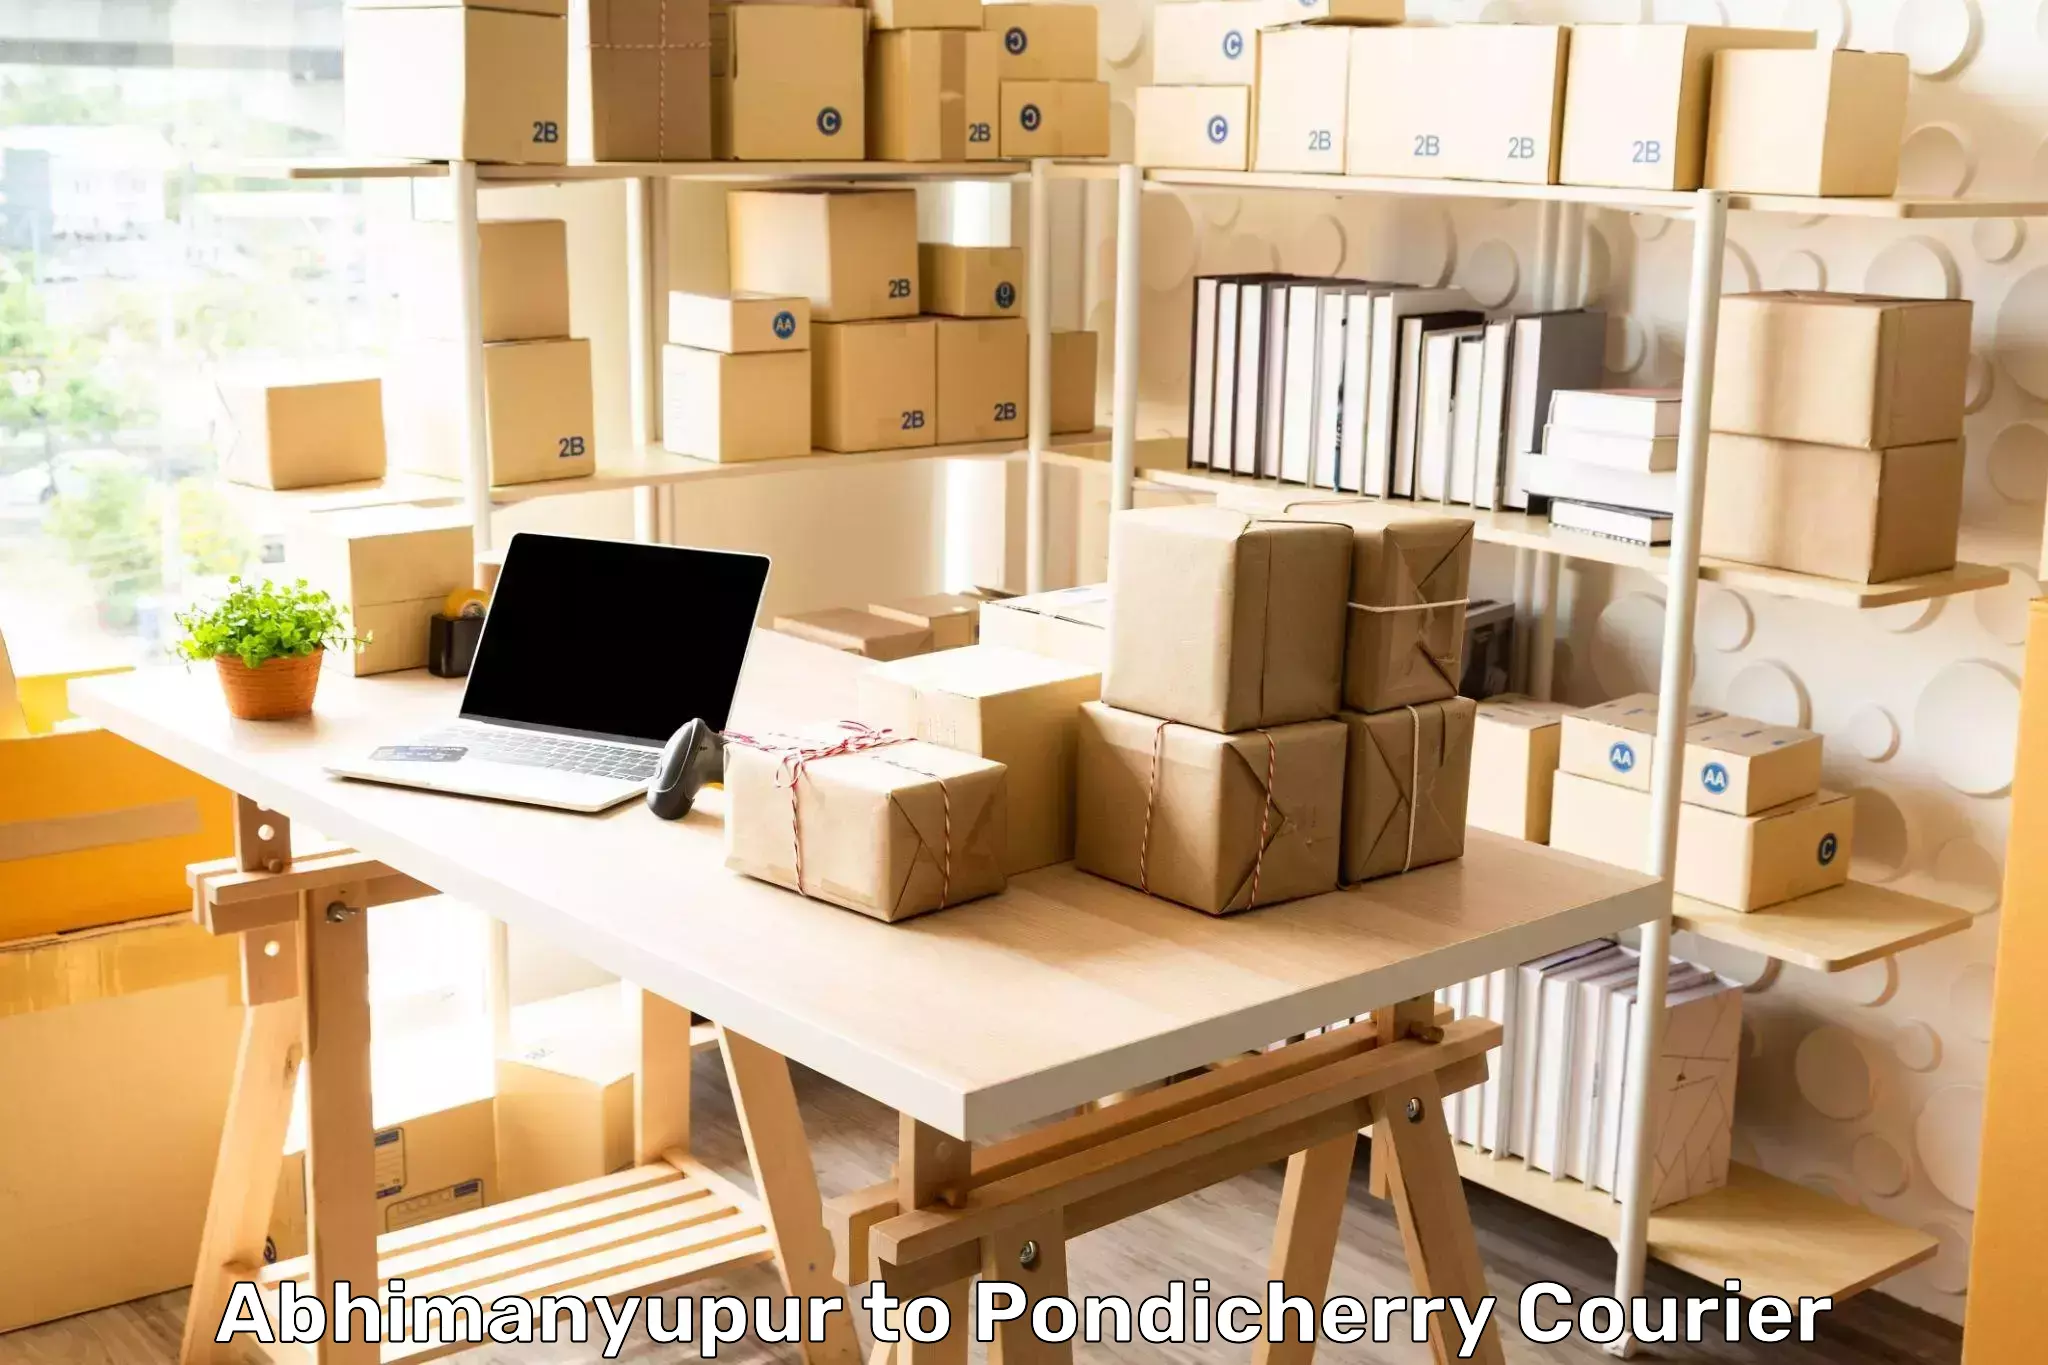 Full-service courier options Abhimanyupur to Pondicherry University